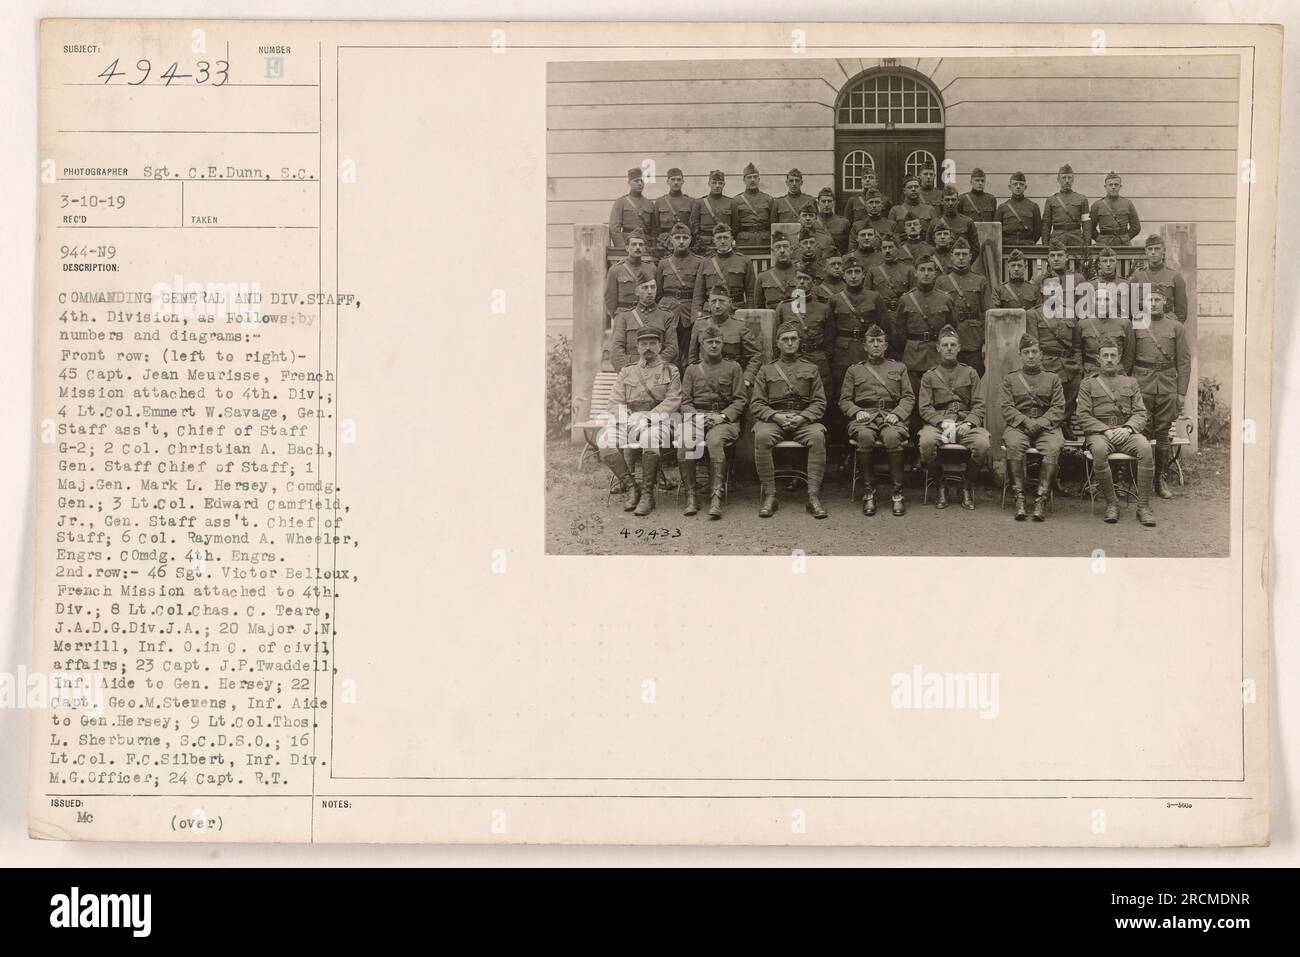 Caption: Commanding General and Division Staff of the 4th Division during World War One. Photograph taken by Sgt. C.E. Dunn on March 10, 1919. Front row (left to right): Capt. Jean Meurisse, Lt. Col. Emmeret W. Savage, Col. Christian A. Bach, Maj. Gen. Mark L. Hersey, Lt. Col. Edward Camfield Jr., Col. Raymond A. Wheeler. Second row: Sgt. Victor Belloux, Lt. Col. Chas. C. Teare, Major J.N. Merrill, Capt. J.P. Twaddell, Capt. Geo.M. Stevens, Lt. Col. Thos L. Sherburne, Lt. Col. F.C. Silbert, Capt. R.T. Stock Photo